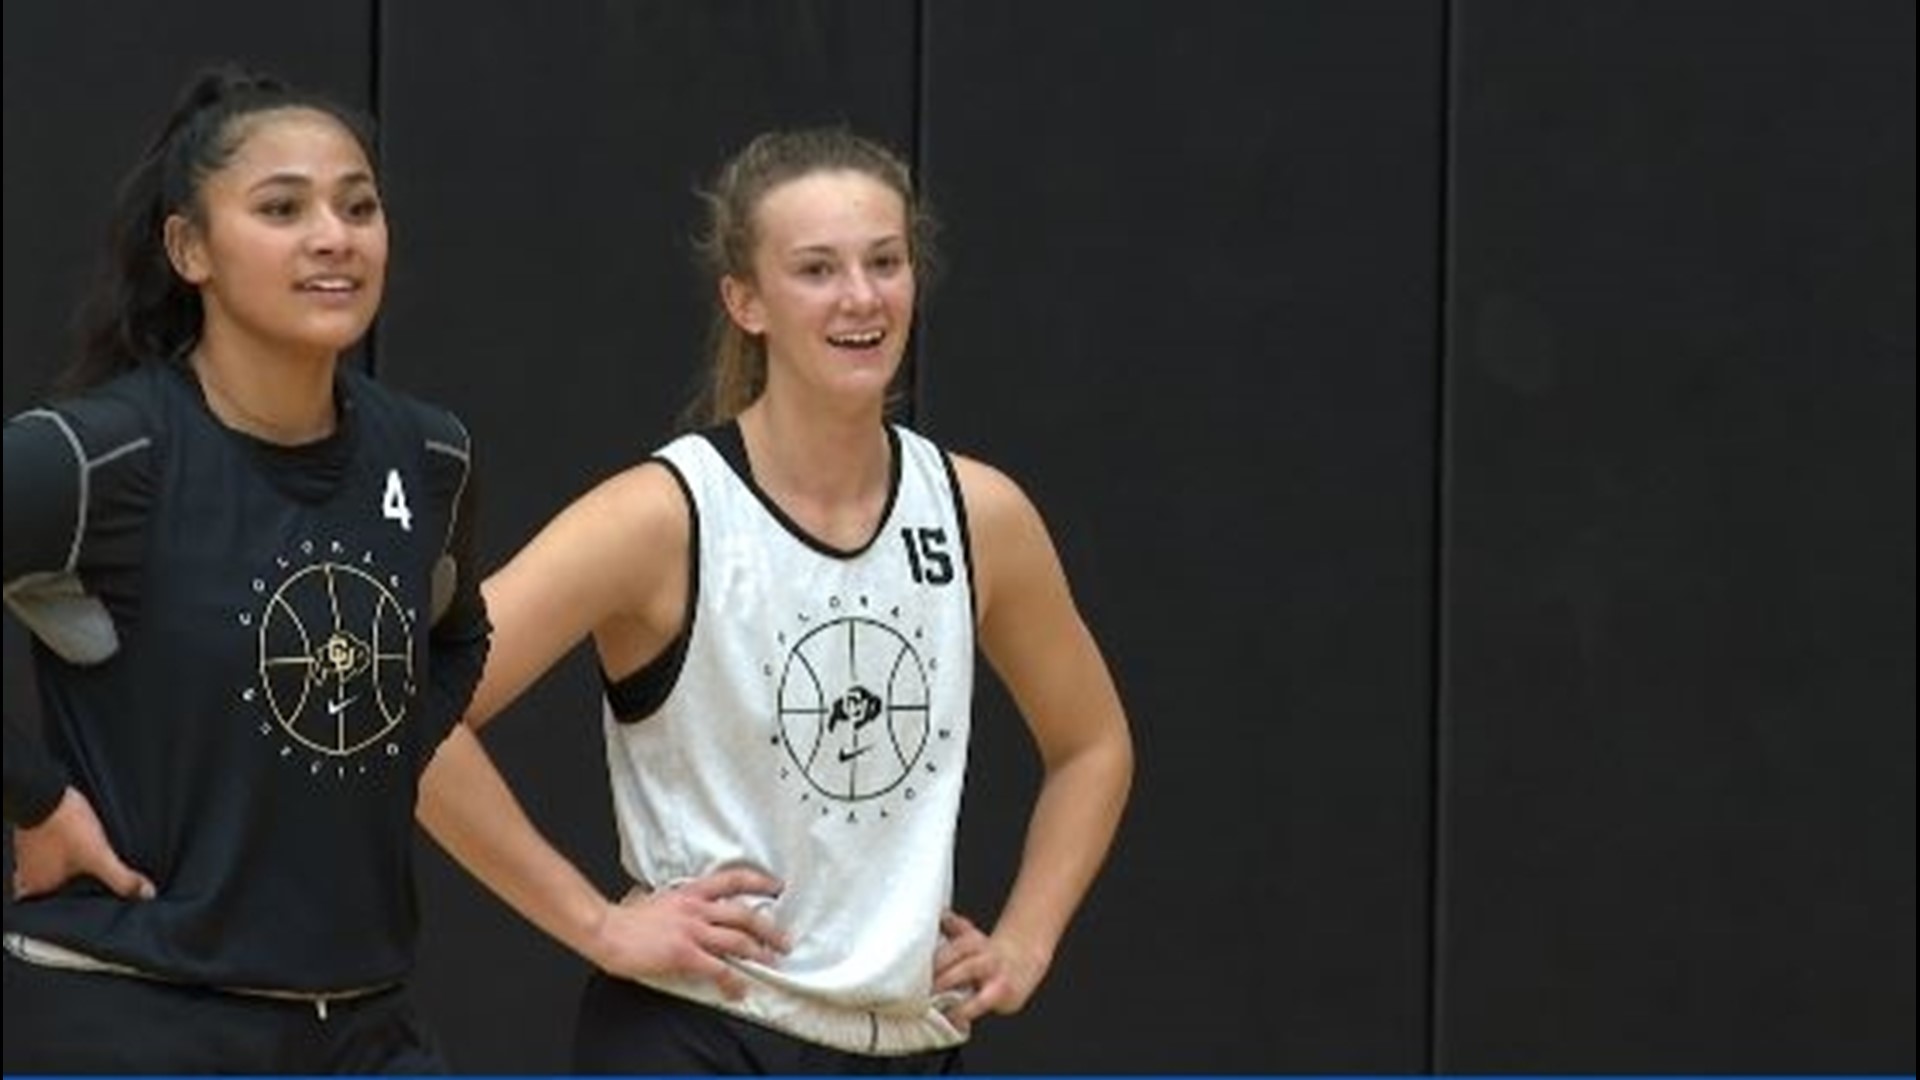 The 5A girls basketball Player of the Year took her talents to the University of Colorado this season, where her mom Valerie played more than 25 years ago.